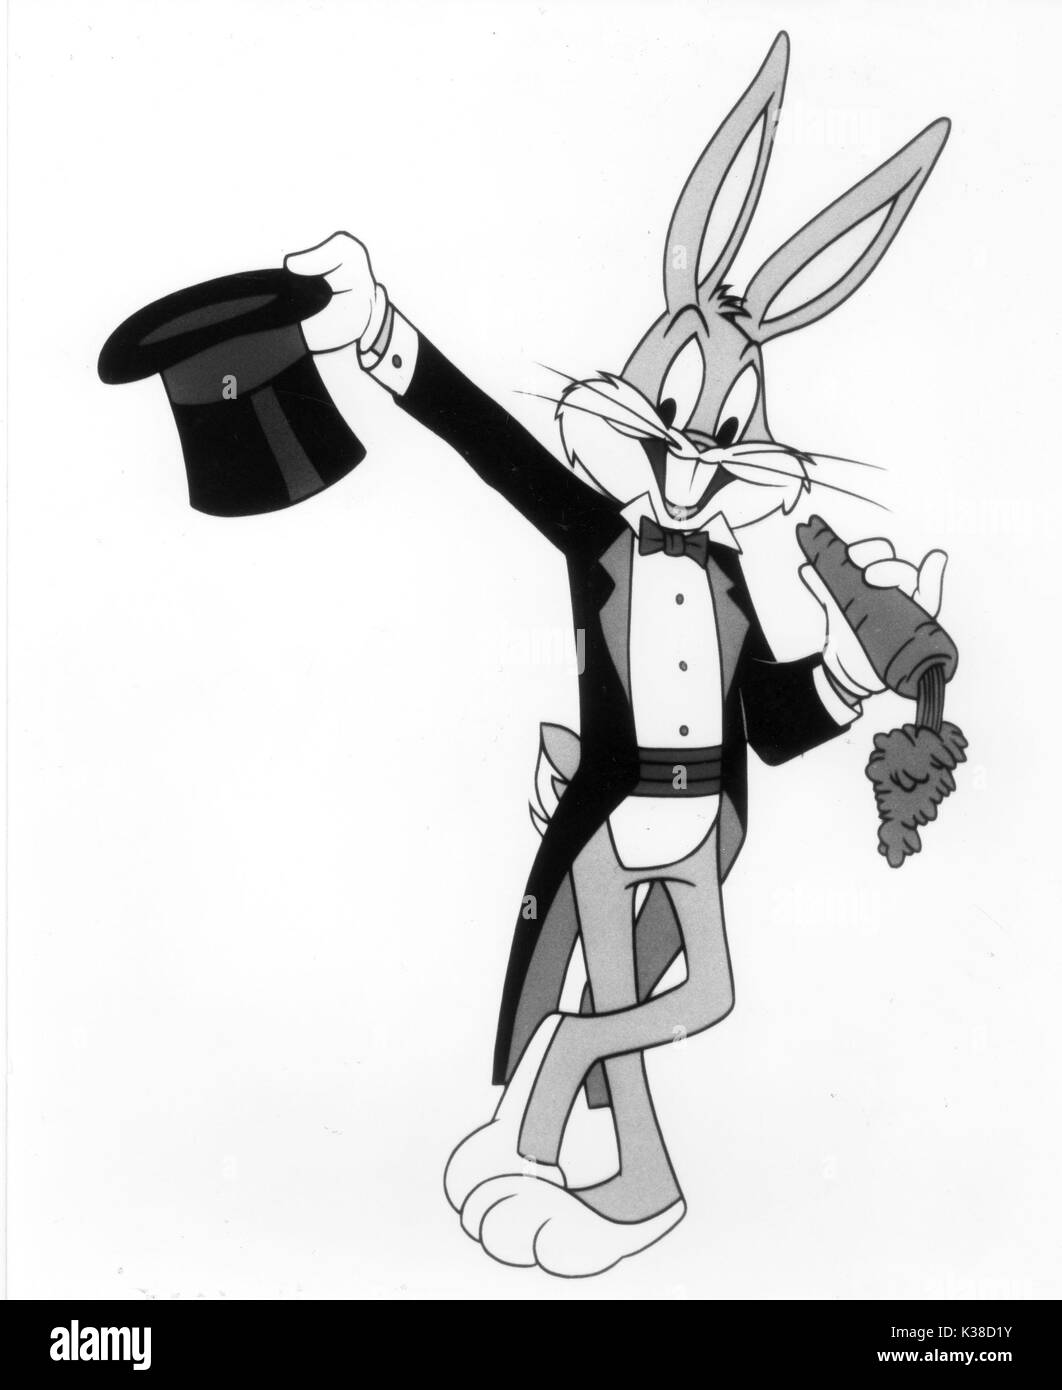 Is Bugs Bunny under copyright?